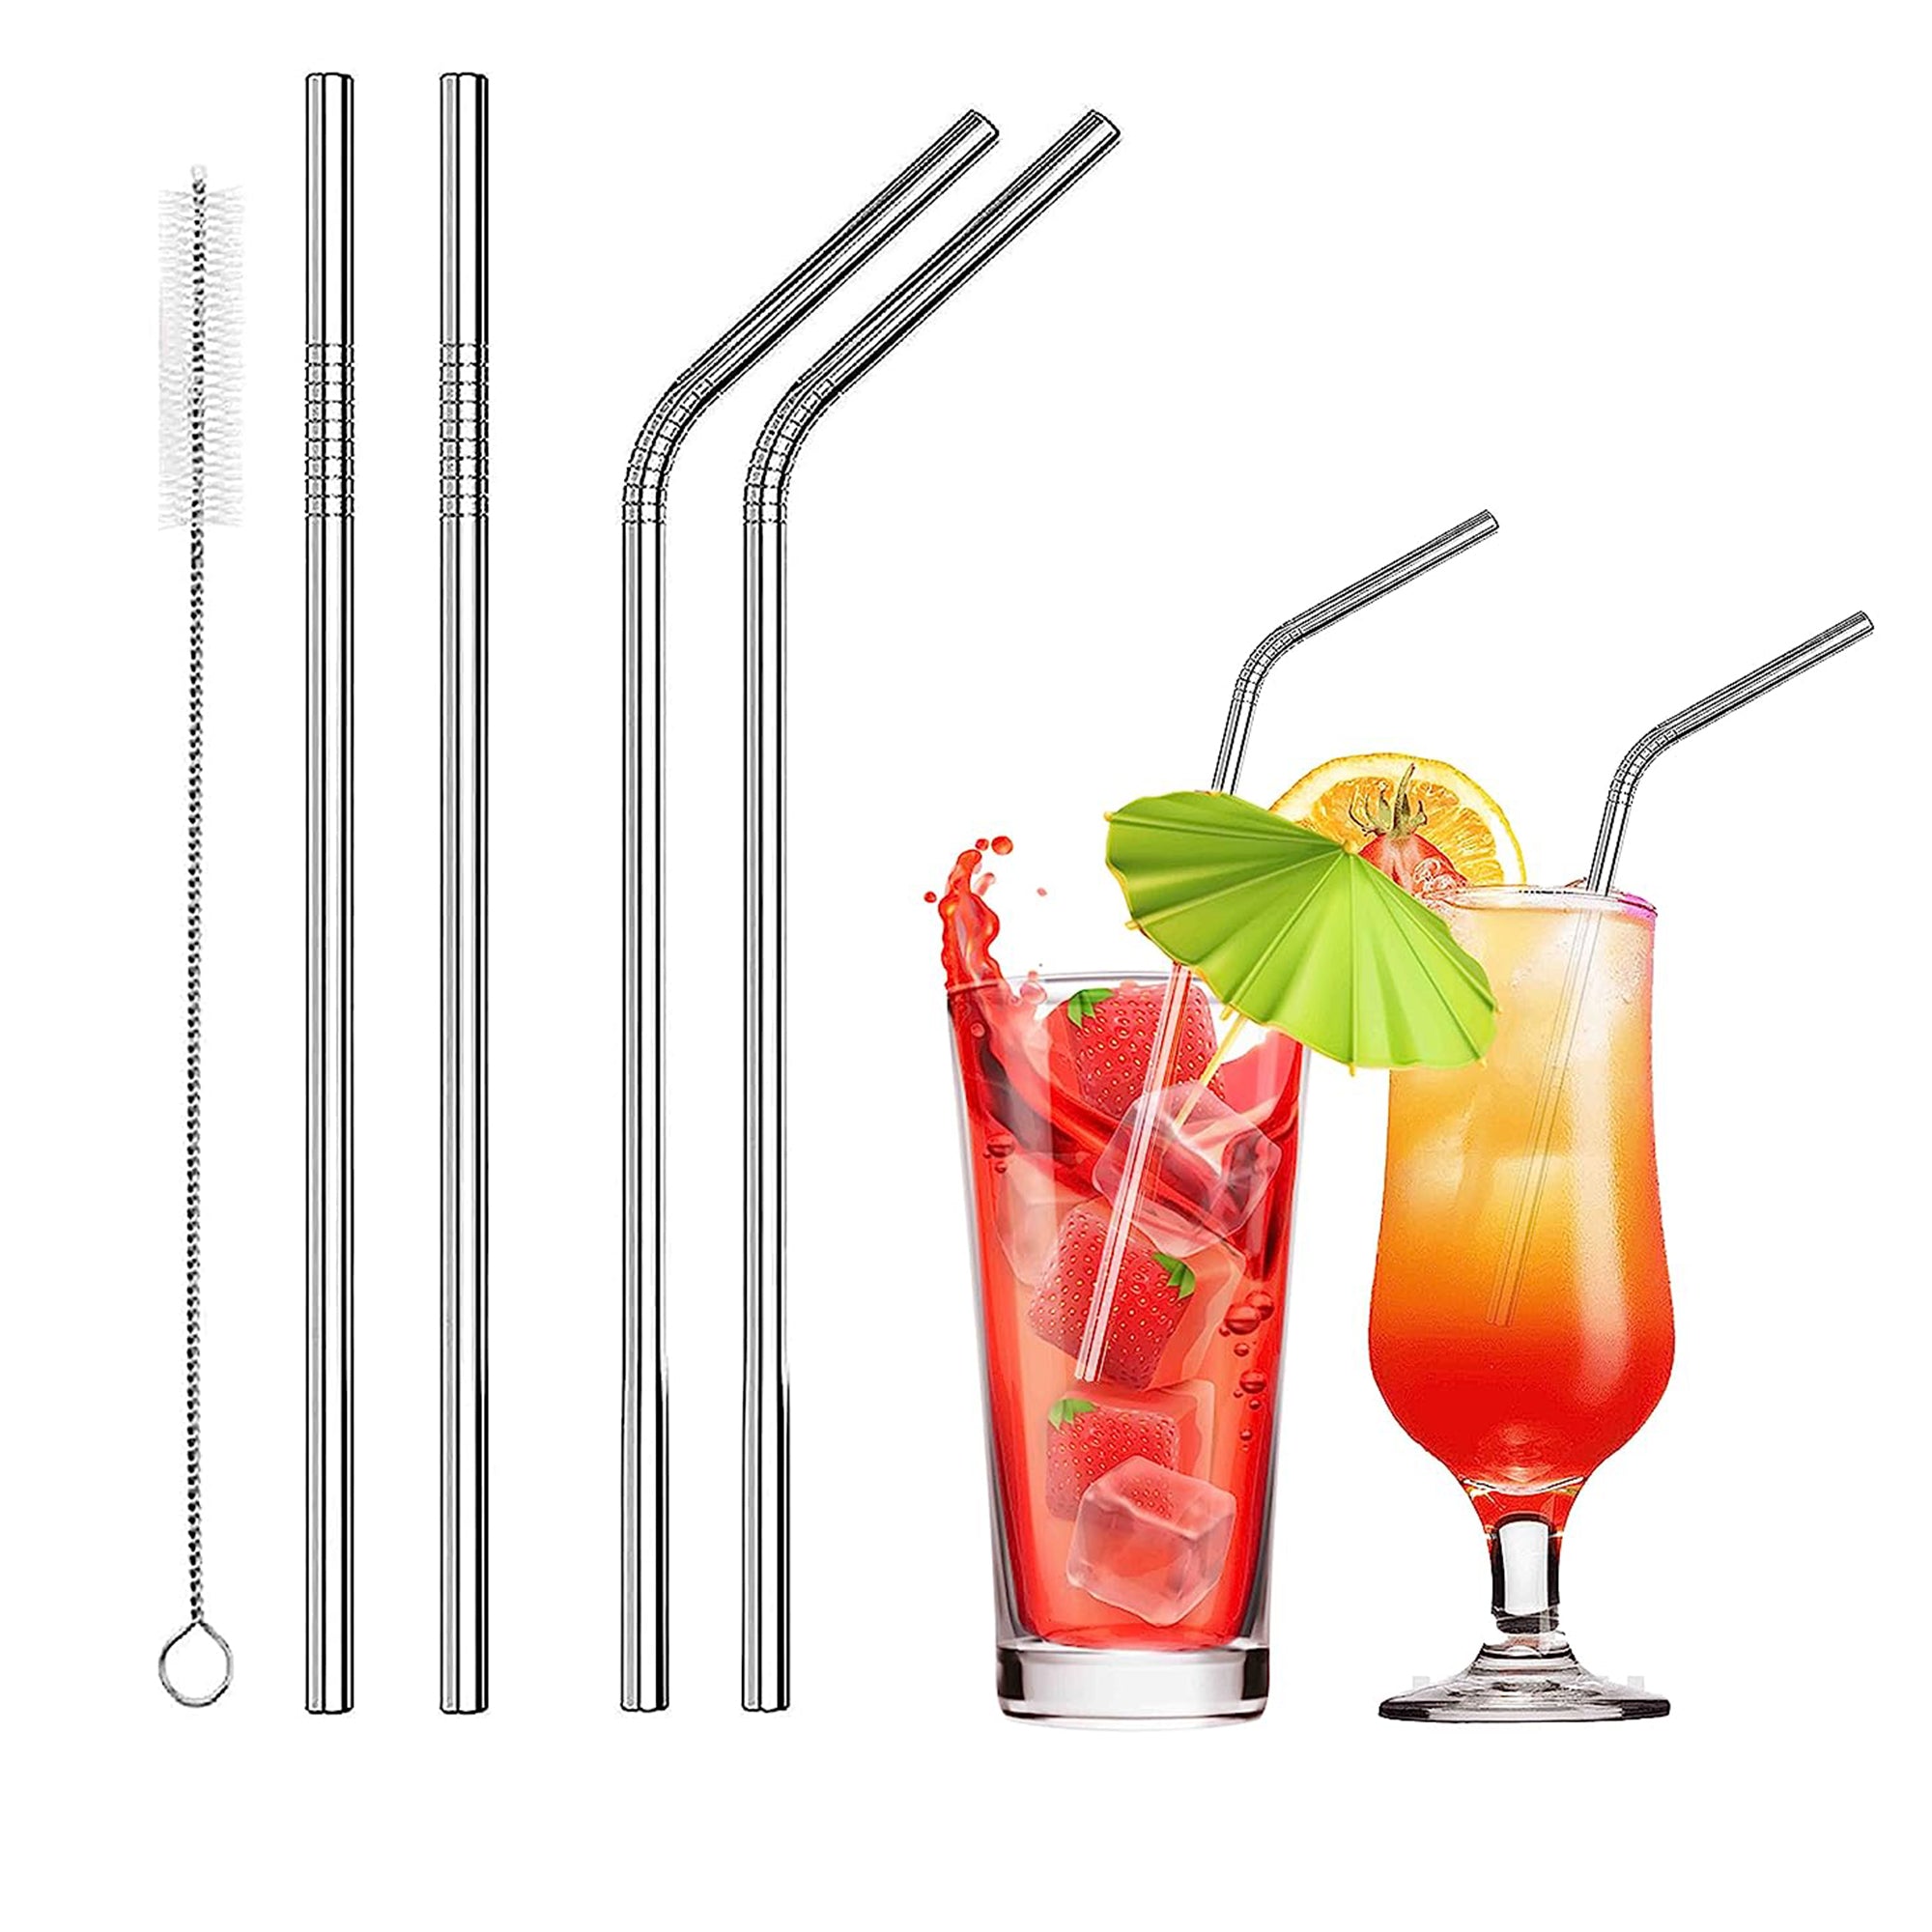 Manogyam RevoSteel Straws: Sustainable Stainless Steel Straws for Eco-Conscious Sipping